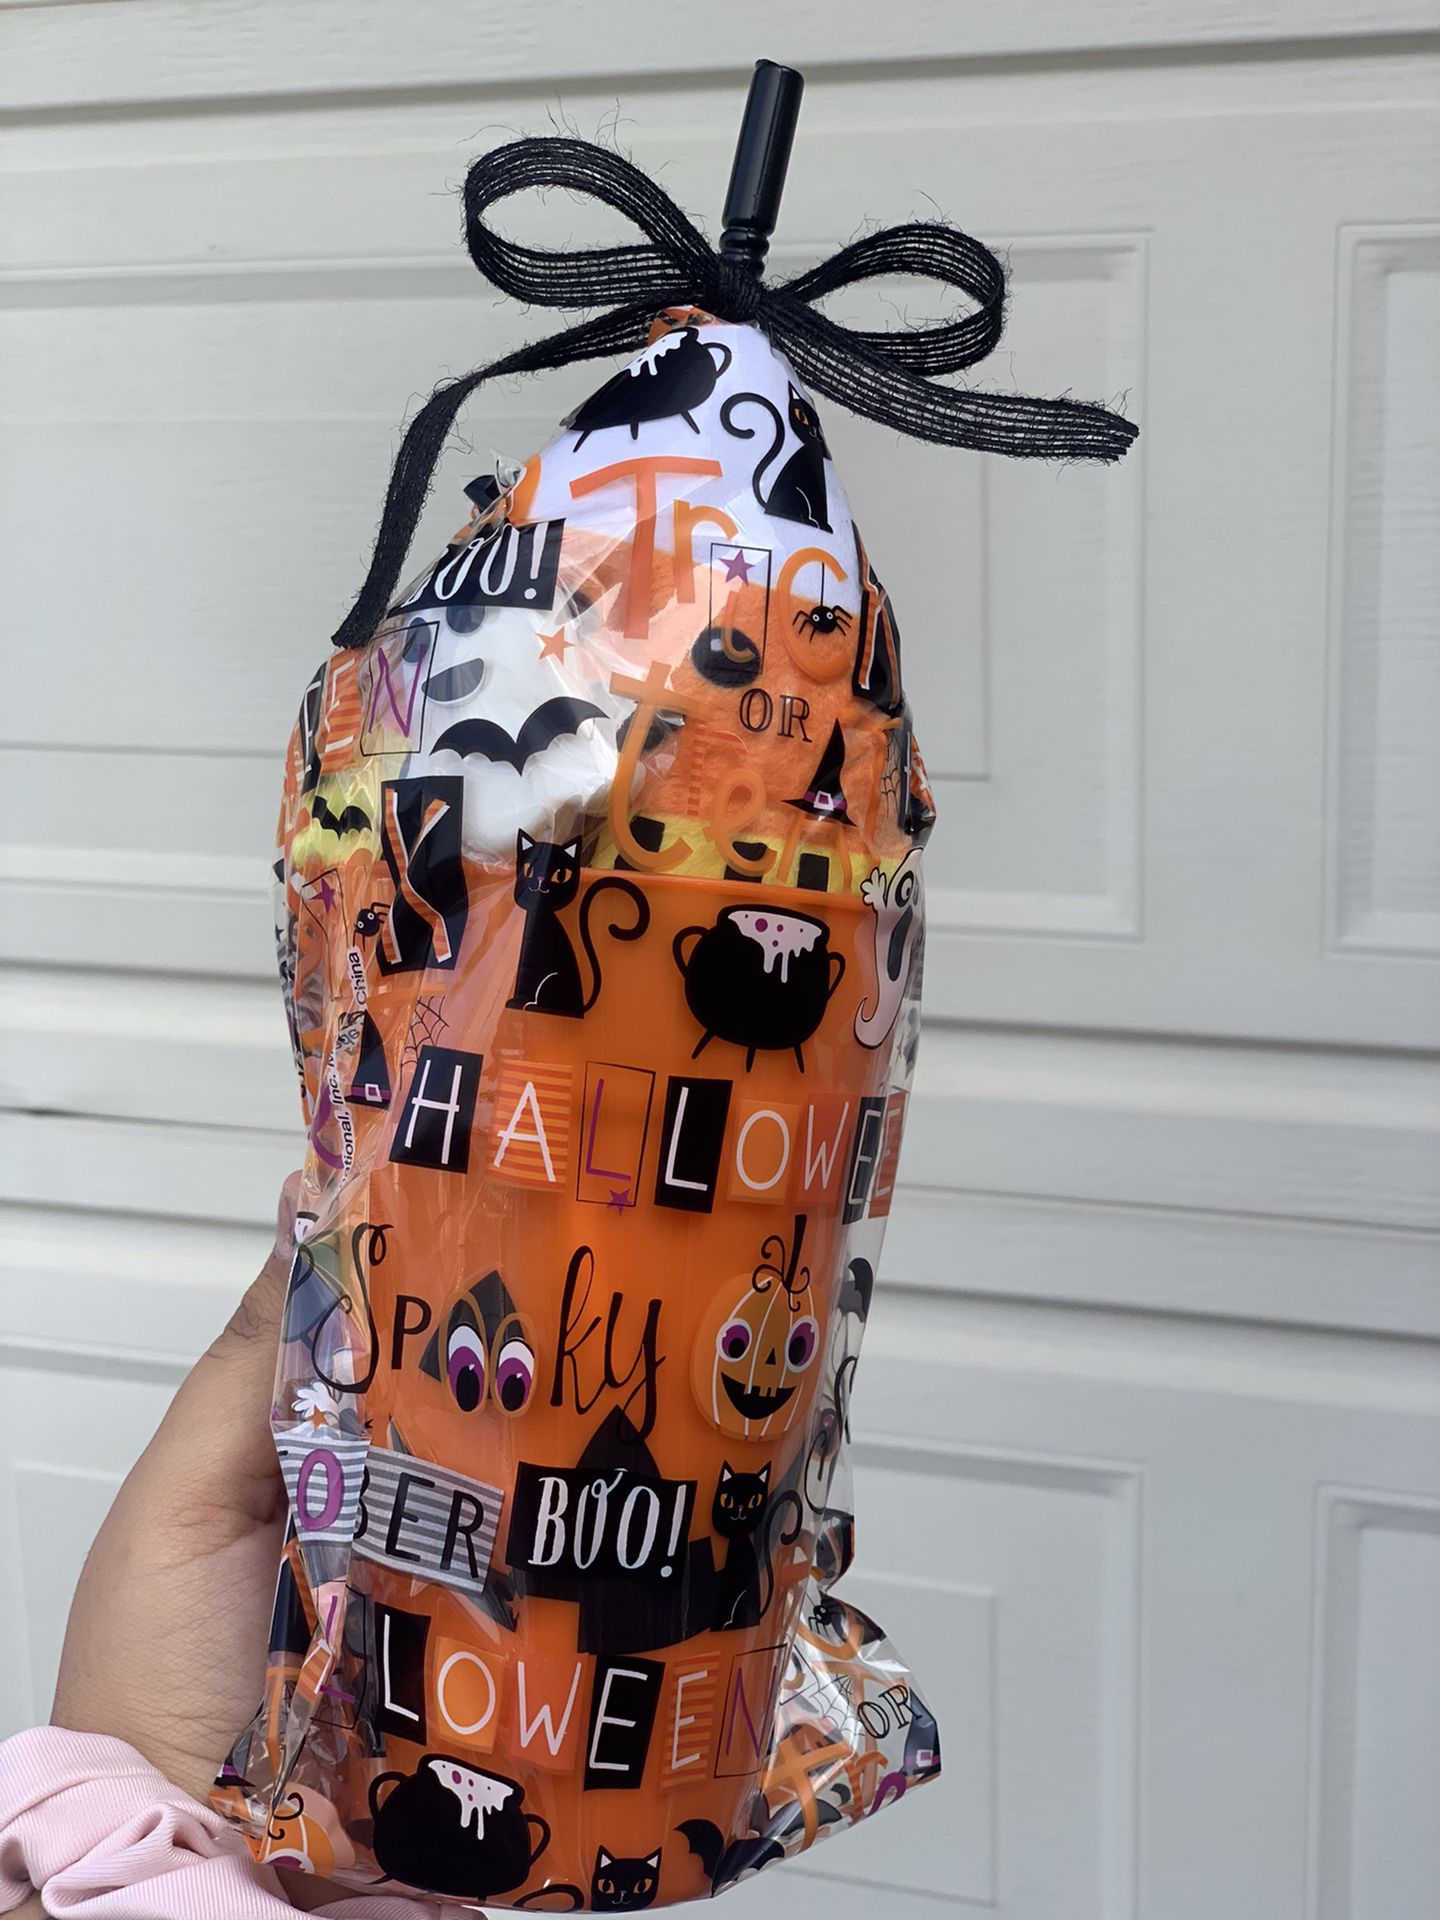 Spooky Goodie Bag for kids